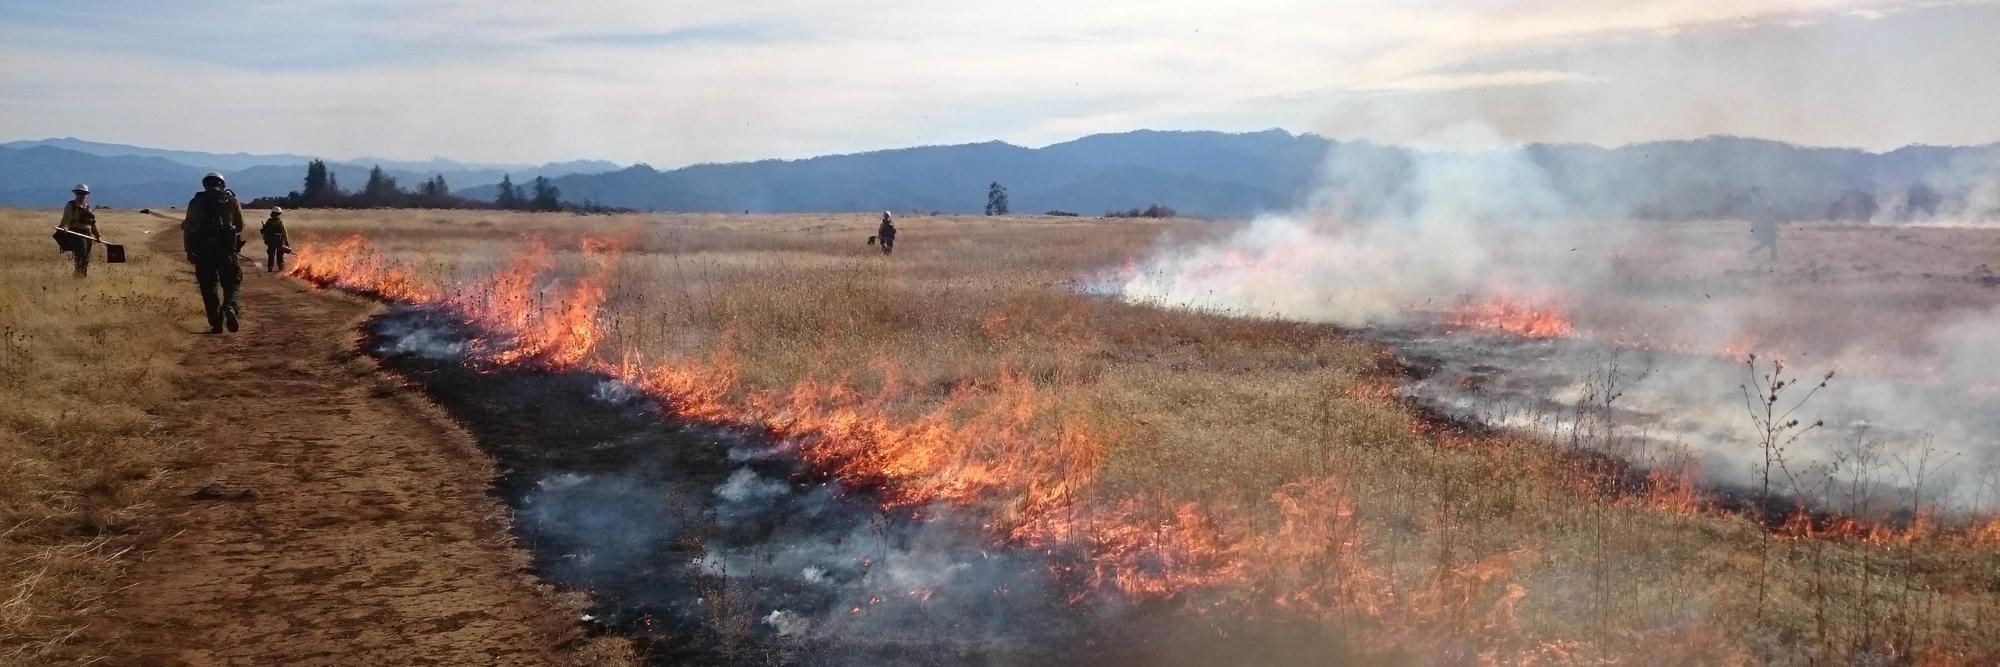 fire burning along fire line in grassland figures in background